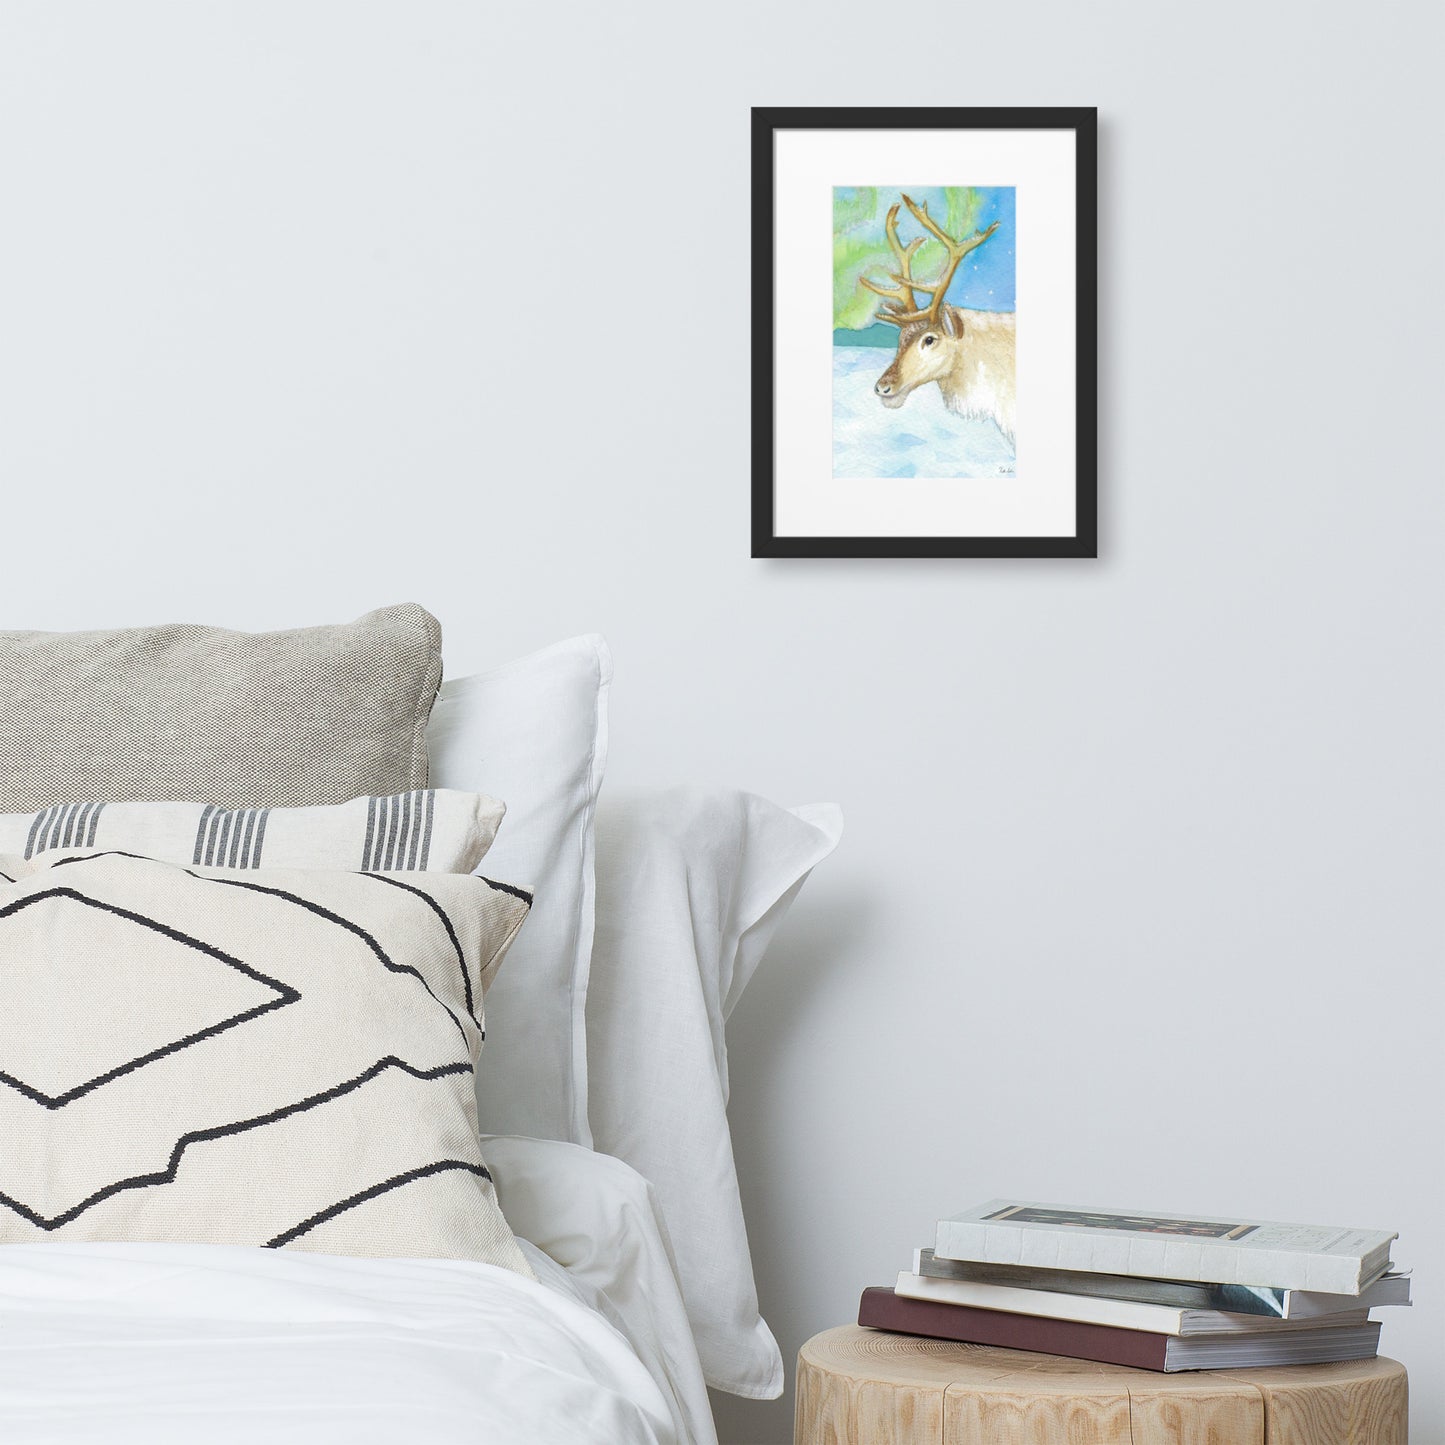 30 by 40 cm art print of a watercolor reindeer in the snow against the northern lights. Framed by a white mat and black ayous wood frame. Has acrylite cover and hanging hardware. Digitally signed by the artist, Heather Silver. Shown on wall above wooden nightstand, books, and bed.